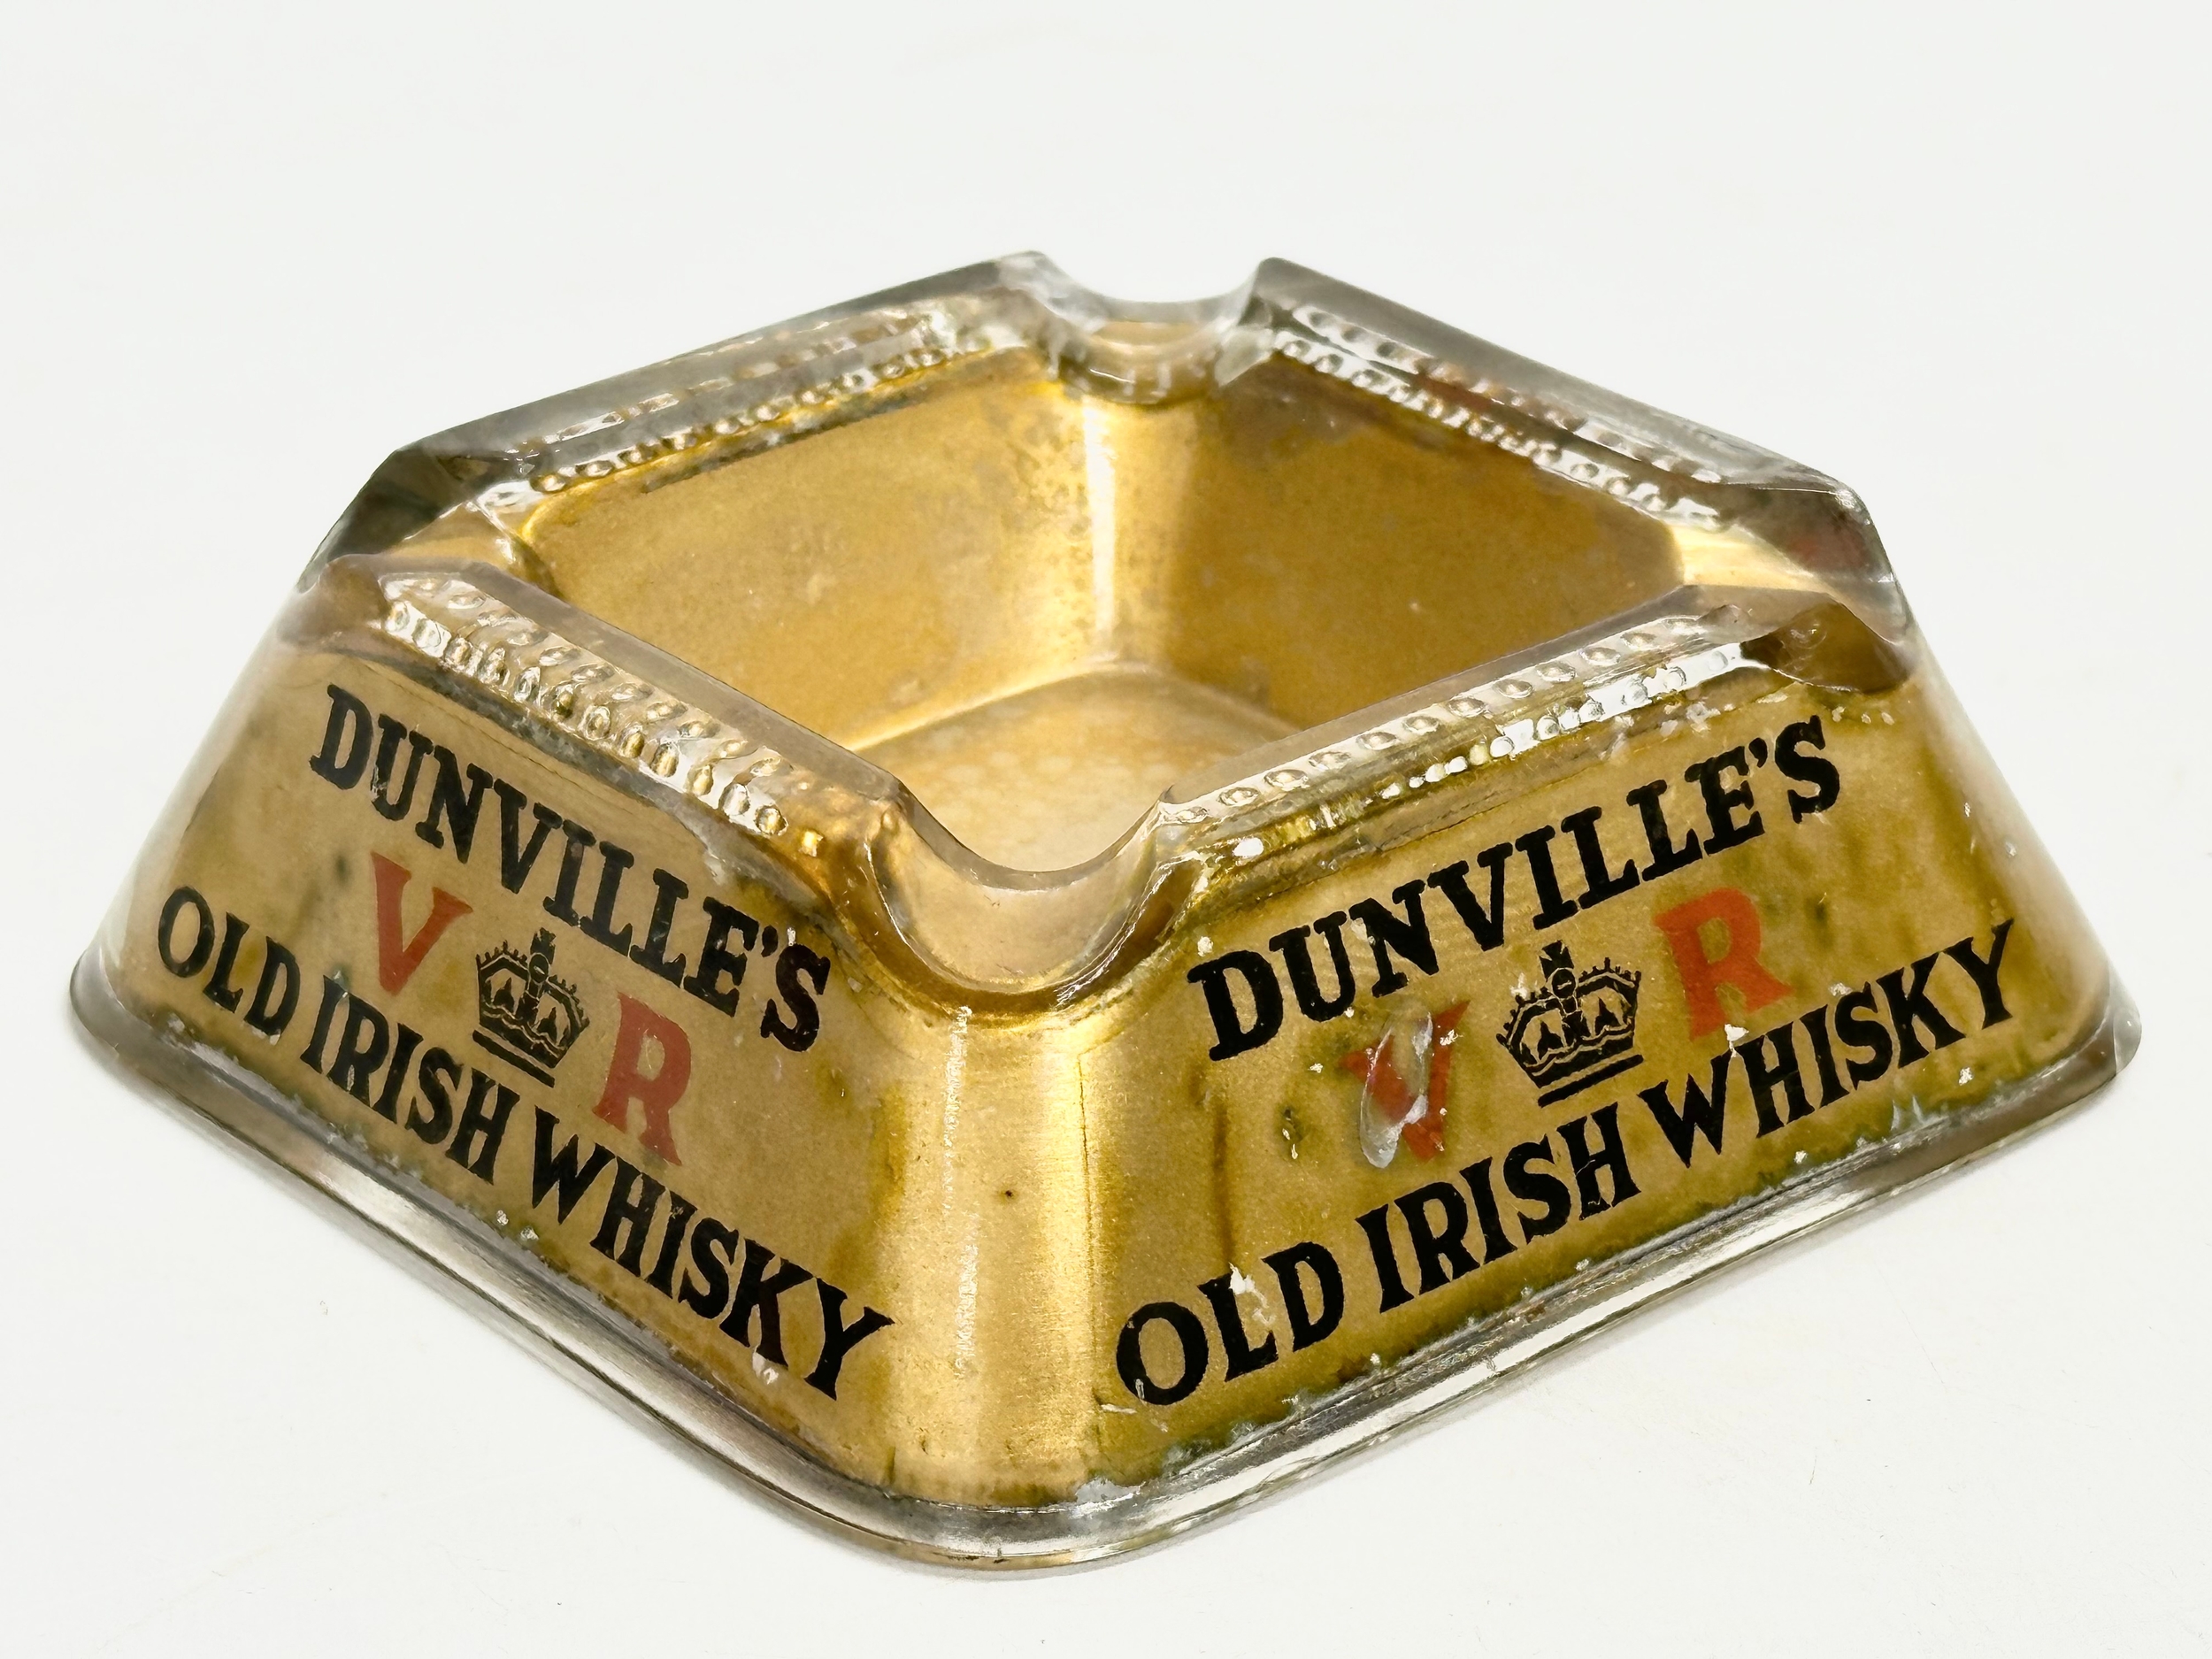 A rare Dunville’s Old Irish Whisky glass ashtray. 11.5x11.5x4cm - Image 2 of 6